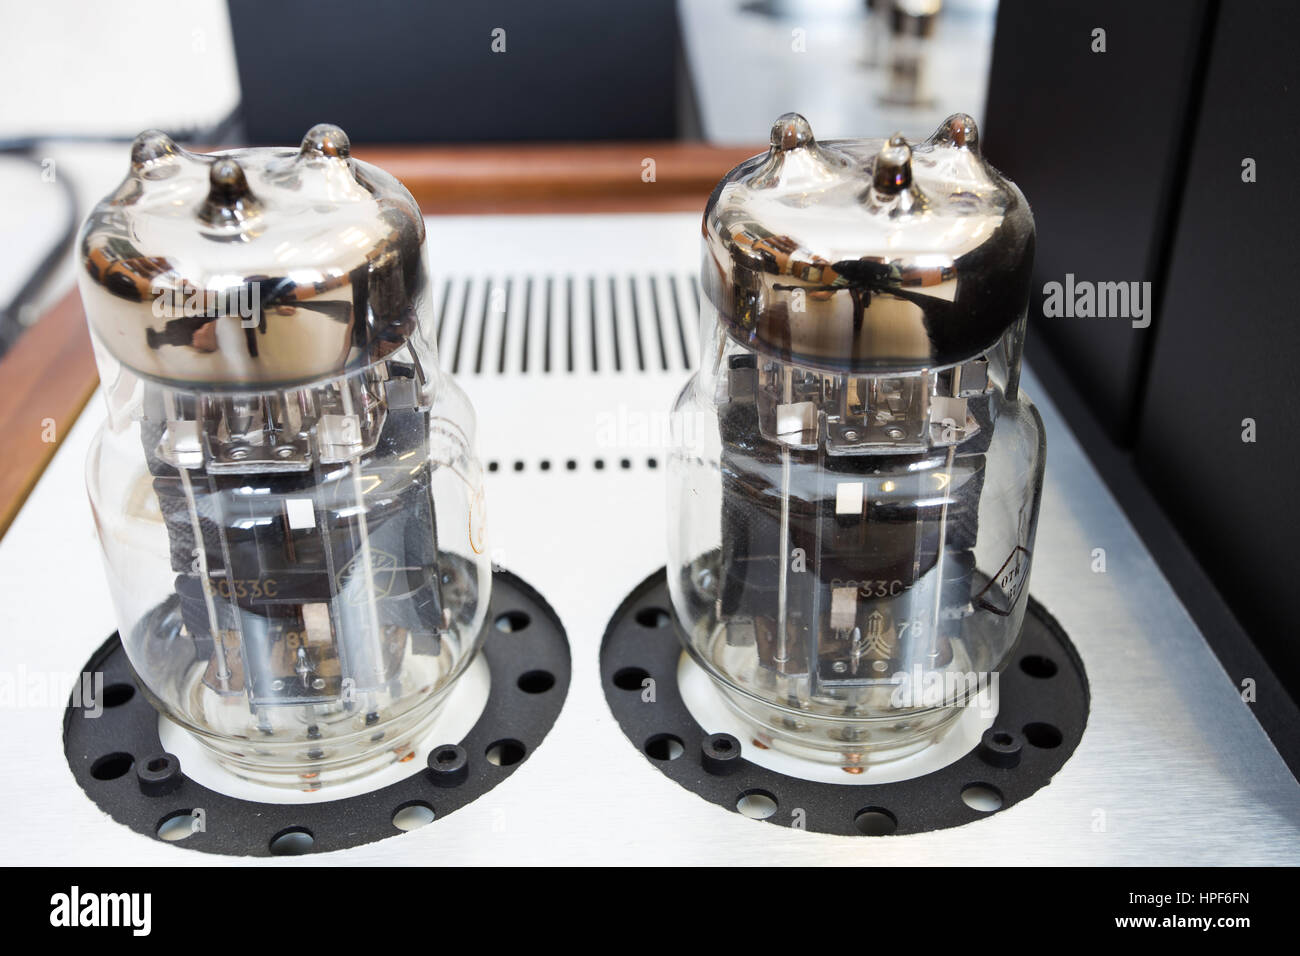 Vintage retro music amplifier with glass lamps on top Stock Photo